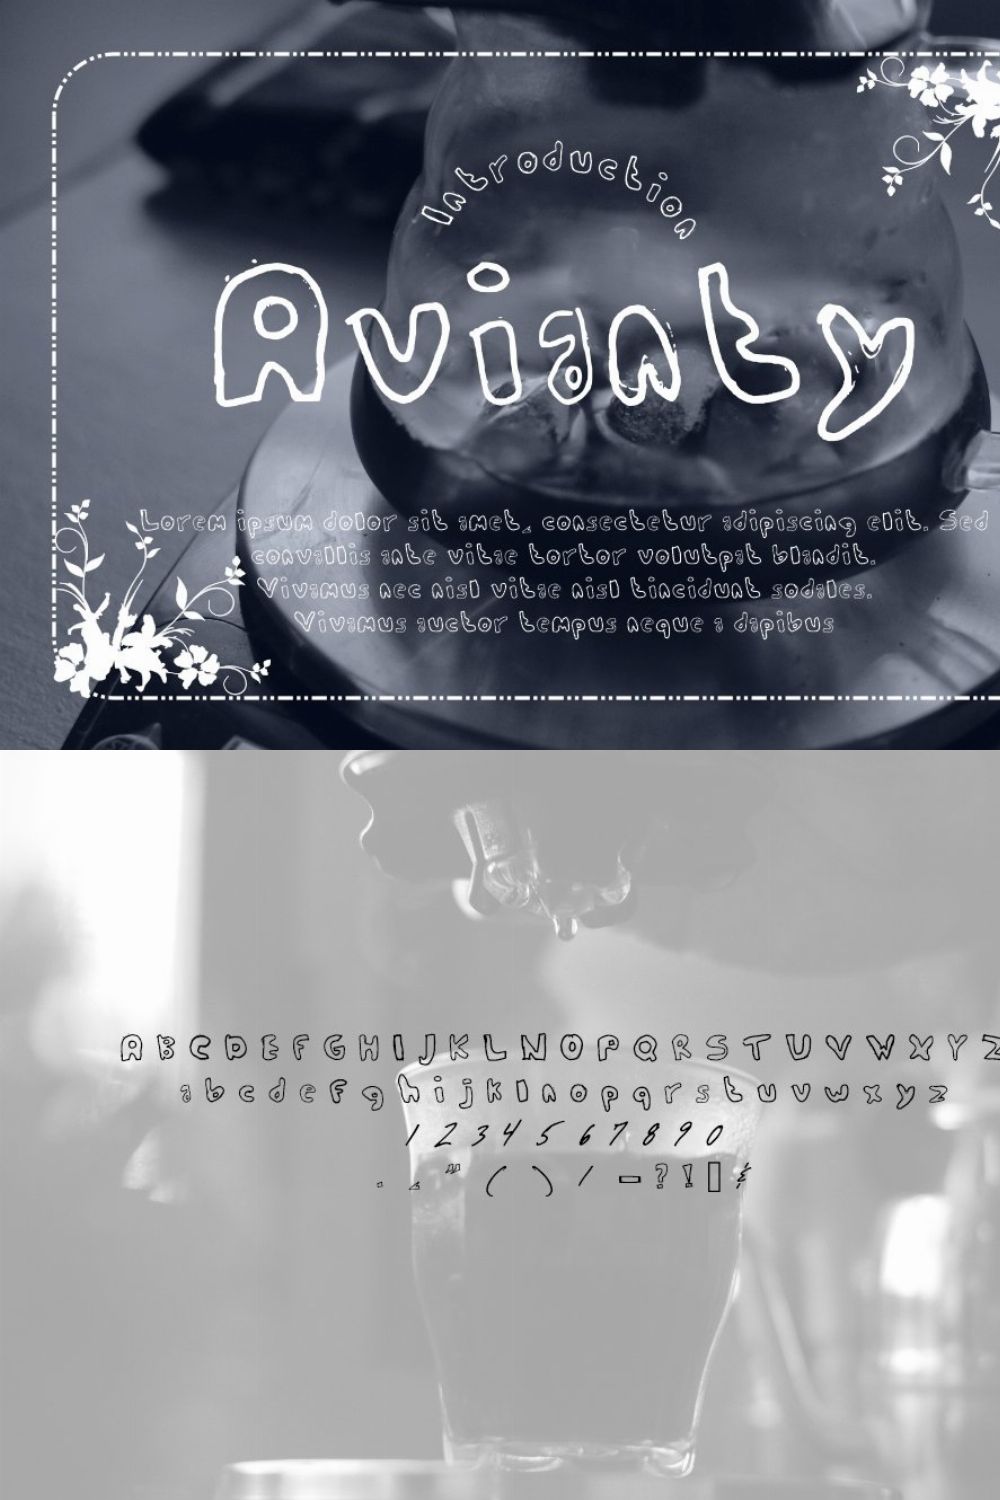 Avianty pinterest preview image.